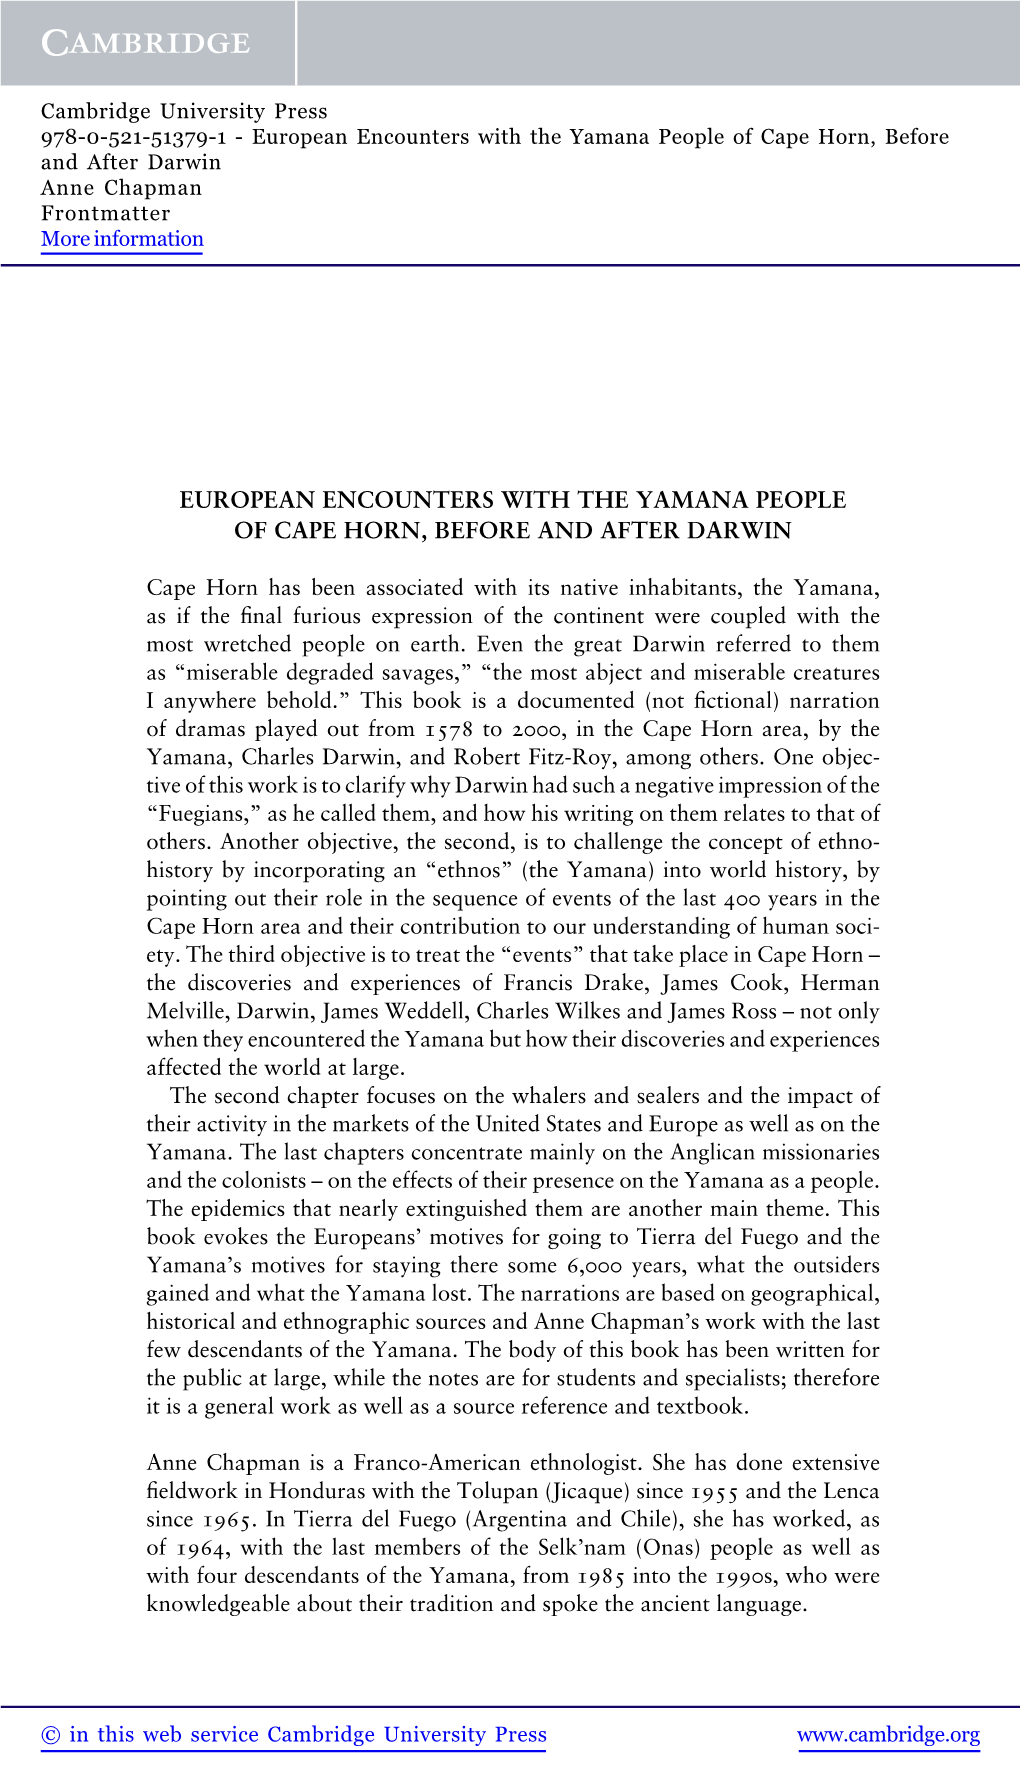 European Encounters with the Yamana People of Cape Horn, Before and After Darwin Anne Chapman Frontmatter More Information